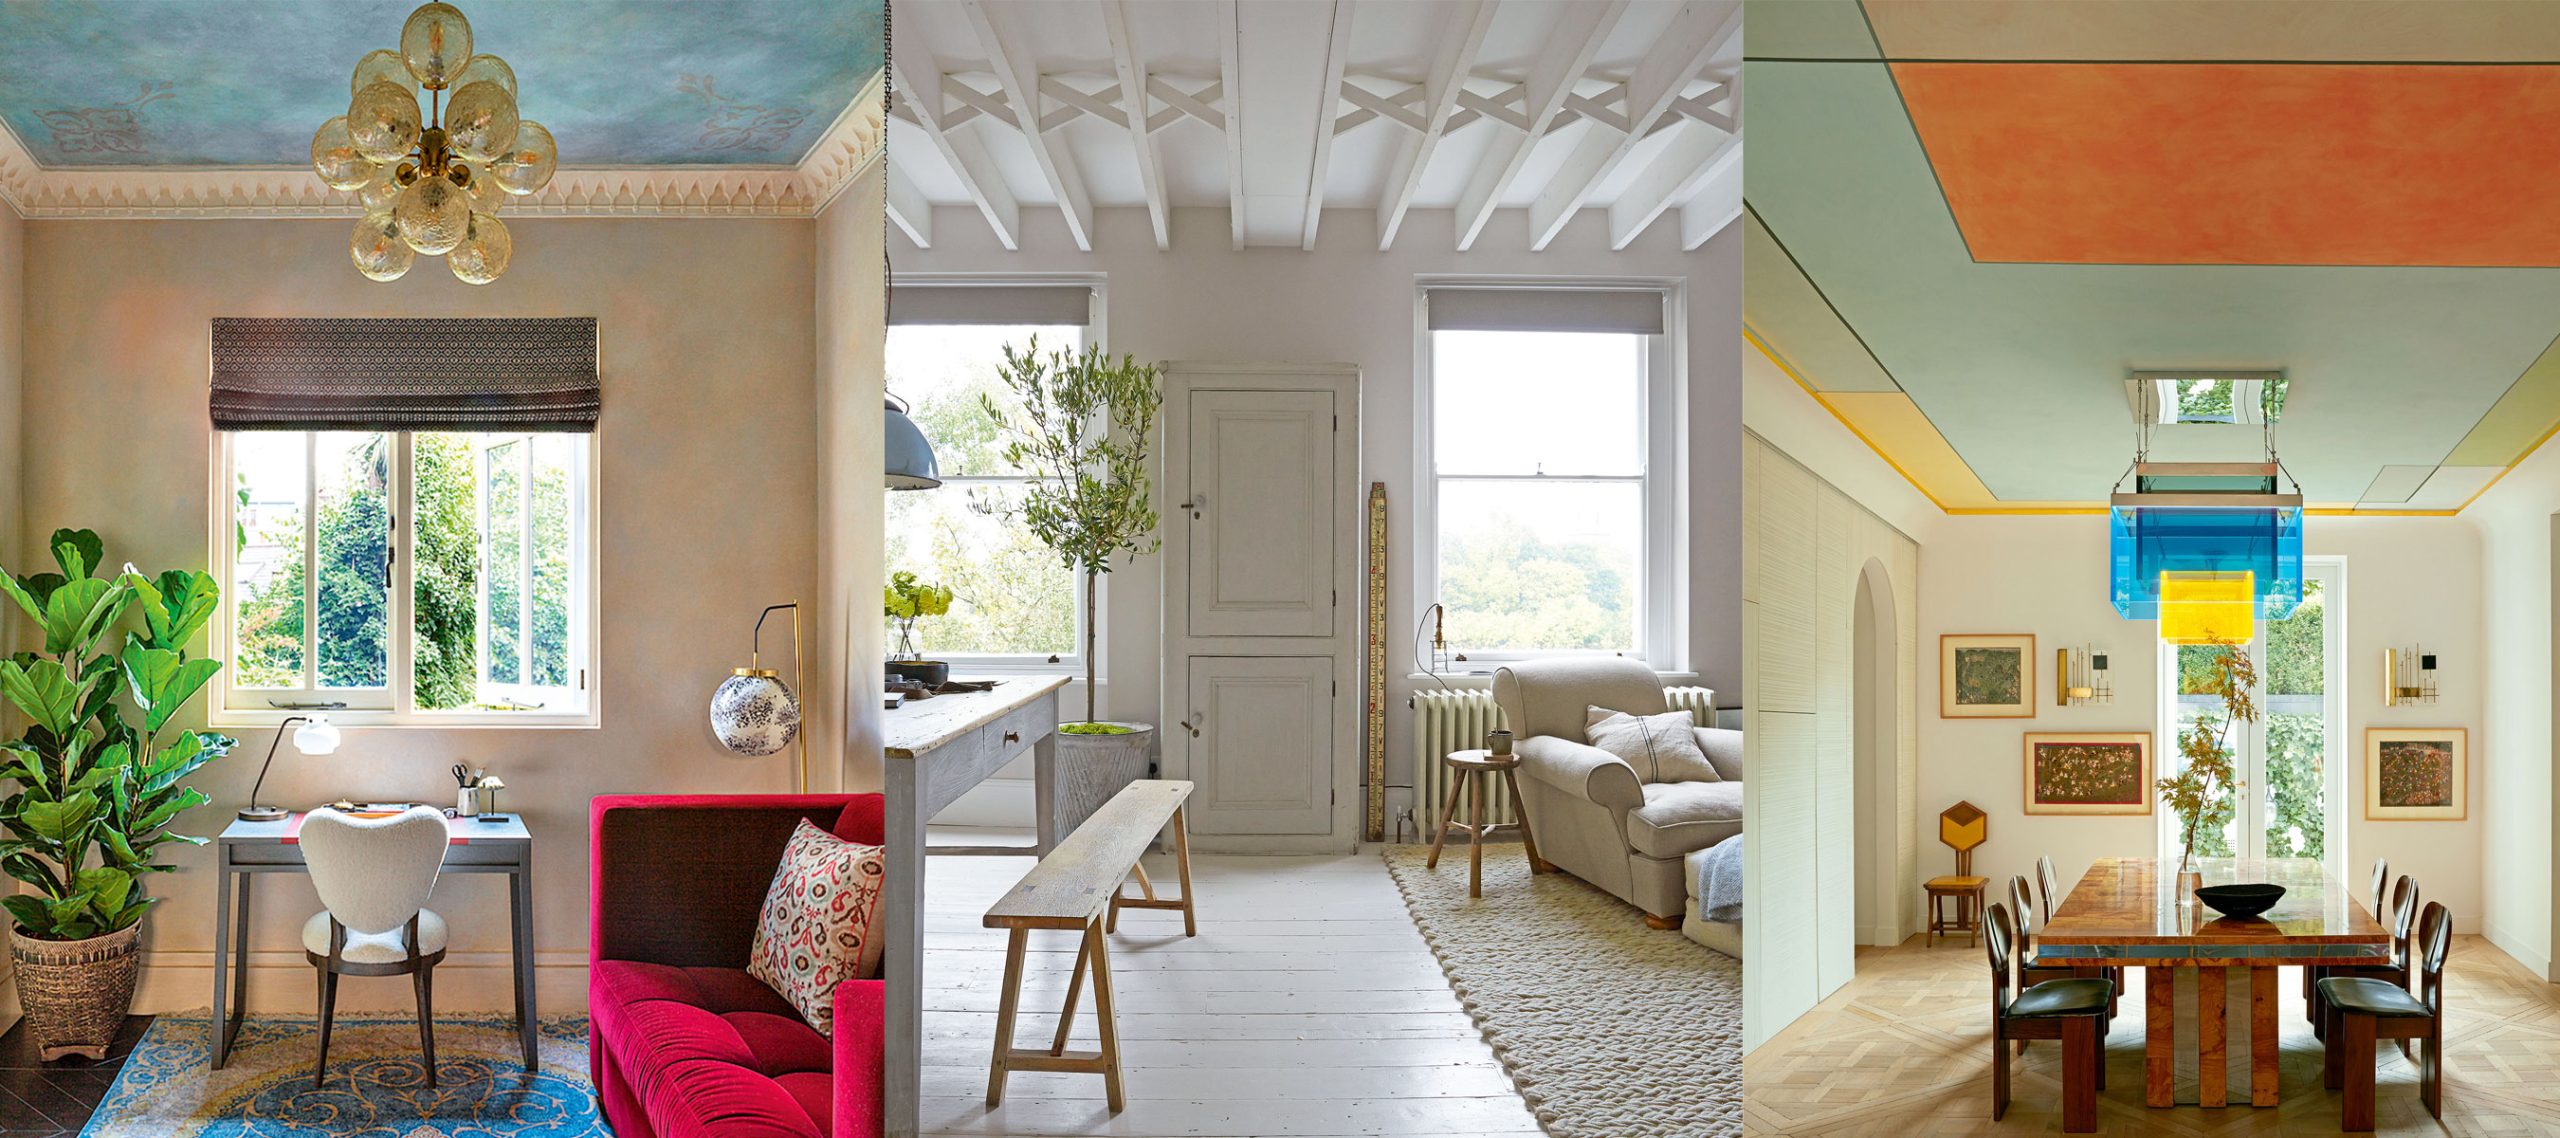 Beyond Walls: Exploring creative ideas to paint ceilings, floors, and furniture